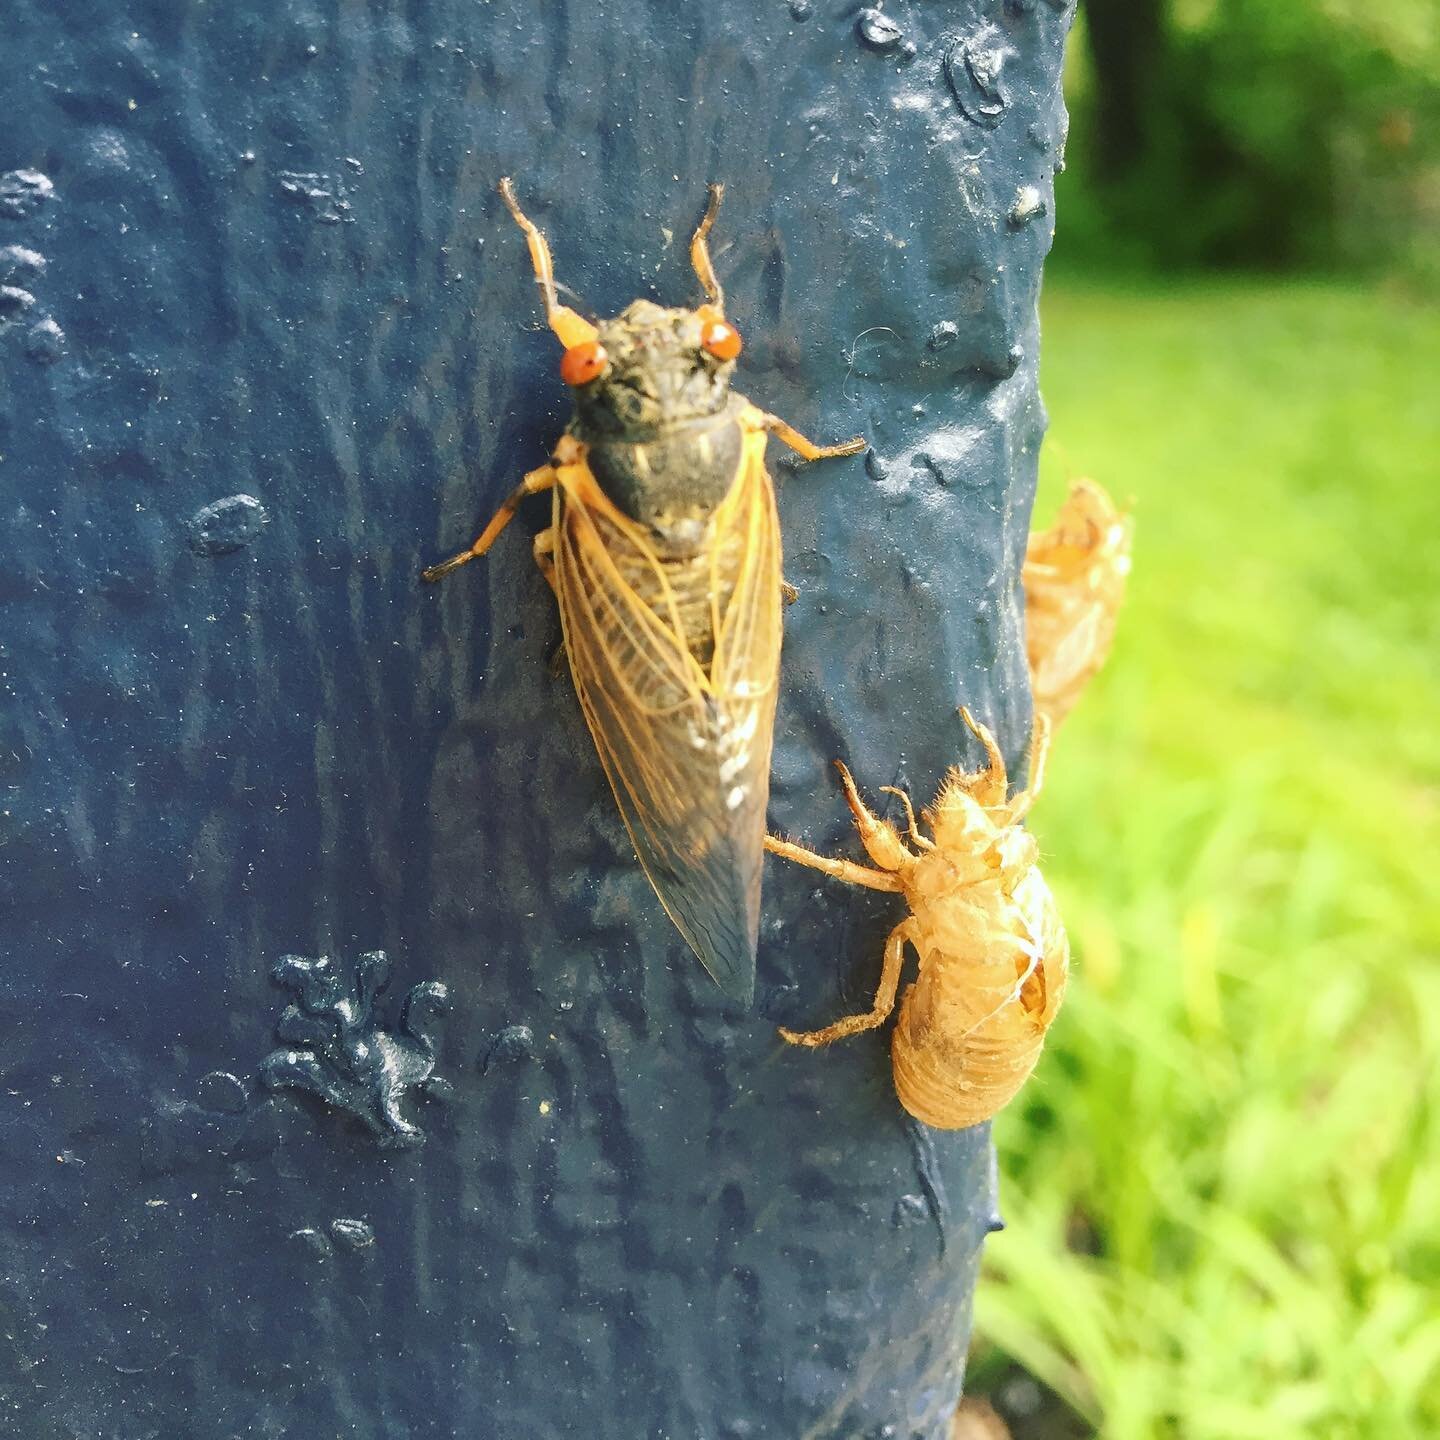 Cw for insect (idk if Instagram is very good at filtering posts that way but figured I&rsquo;d try.) 

Just like the cicadas, I return out of the blue to land in your line of sight. Bzzzzt. I got a phone that can actually store pictures now. 

Someth